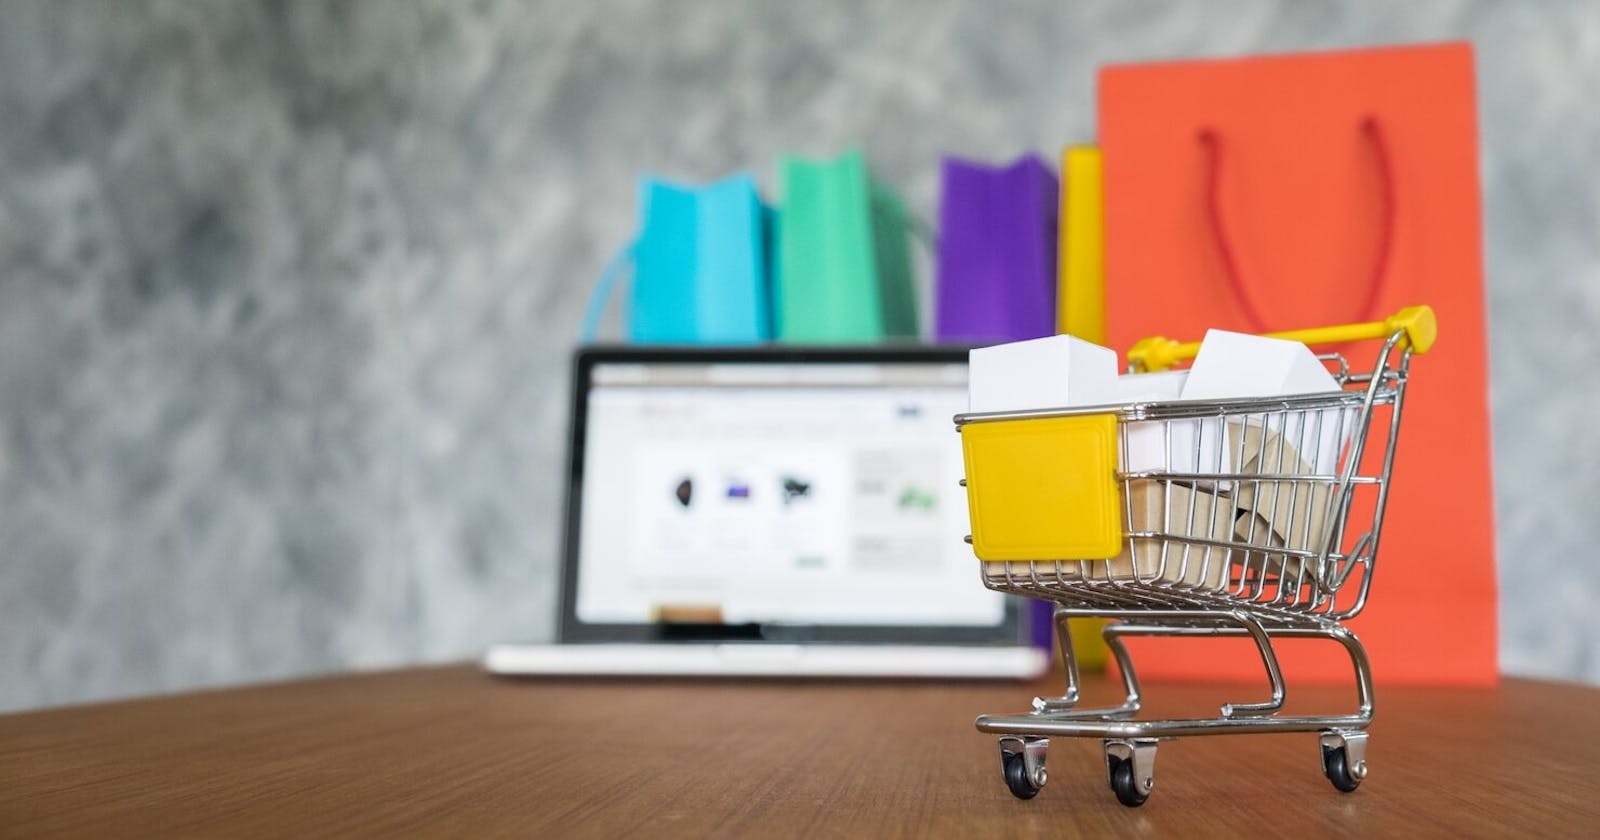 Best CMS To Build An Ecommerce Website